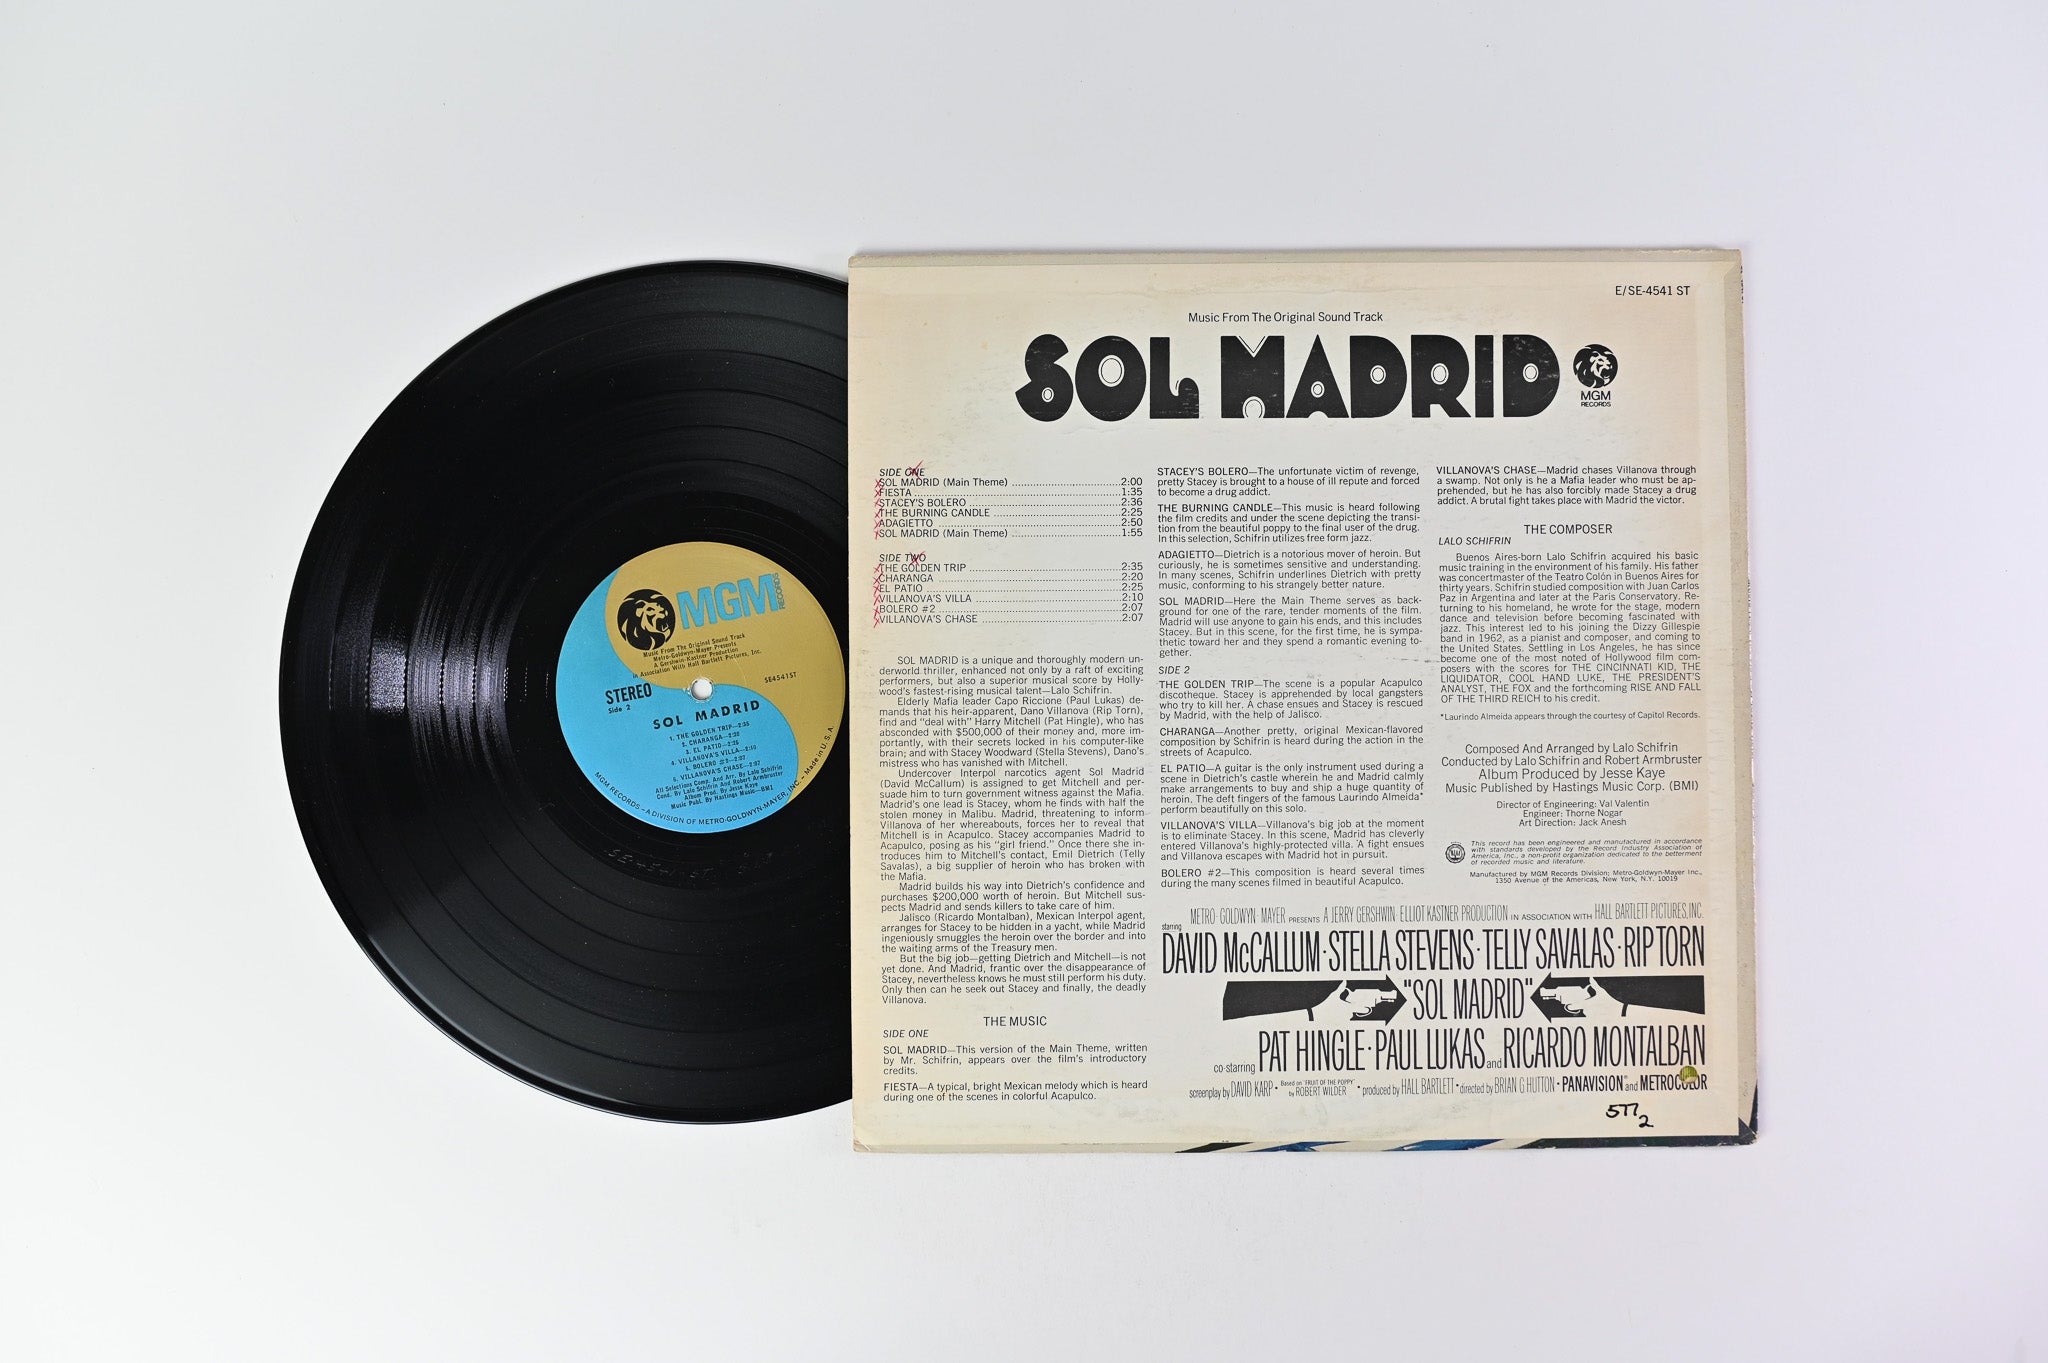 Lalo Schifrin - Sol Madrid (Music From The Original Sound Track) on MGM Records